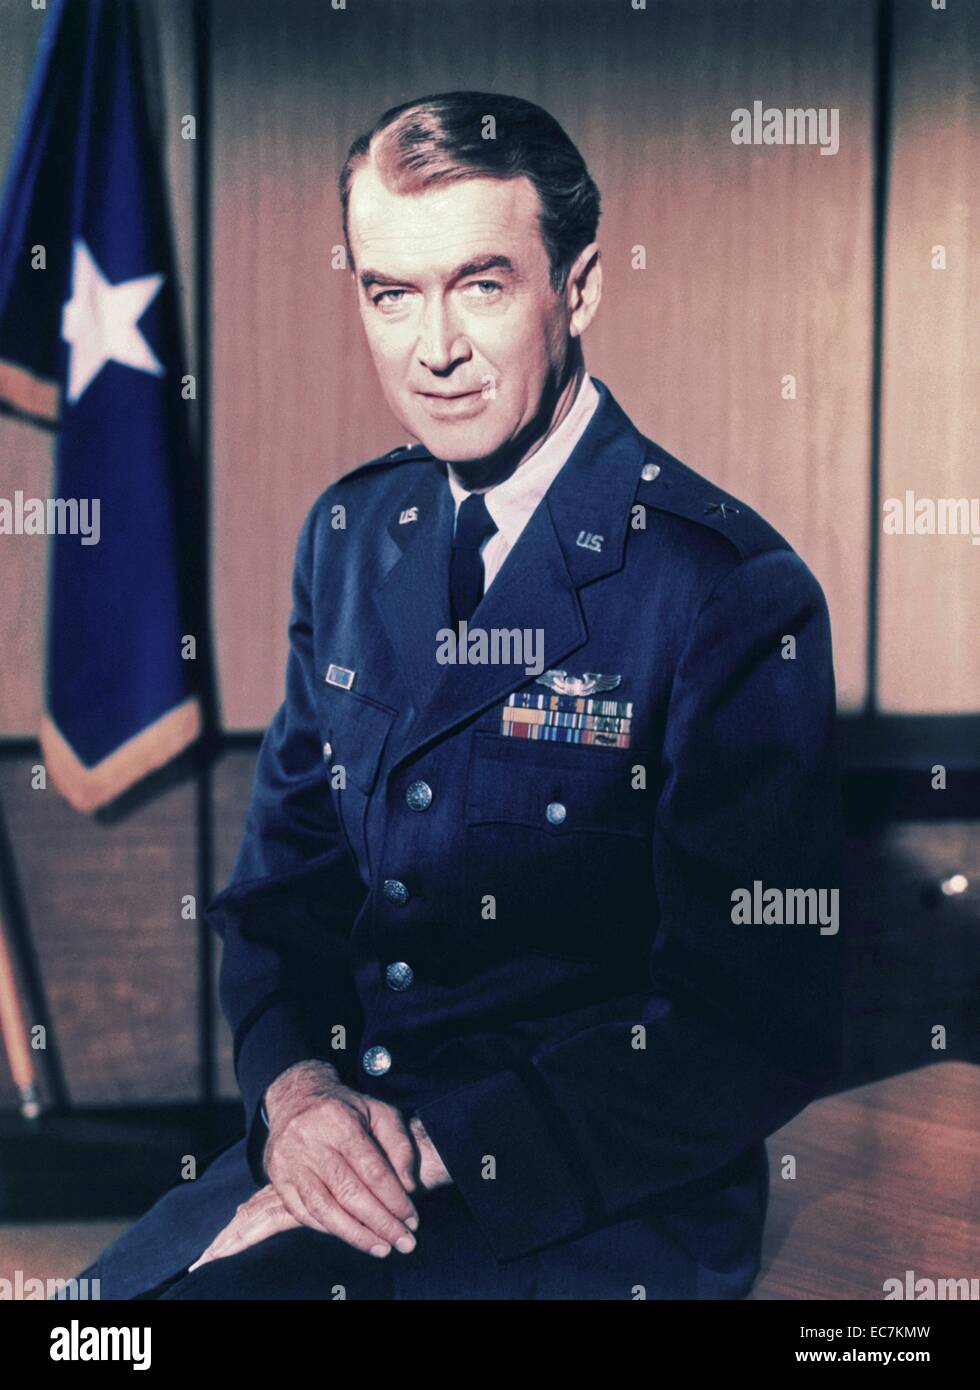 James 'Jimmy' Maitland Stewart[N 1] (May 20, 1908 – July 2, 1997) American film and stage actor, known for his distinctive drawl voice and down-to-earth persona. Stewart was nominated for five Academy Awards, winning one in competition and receiving one Lifetime Achievement award. During World war Two, he served as an air force officer Stock Photo